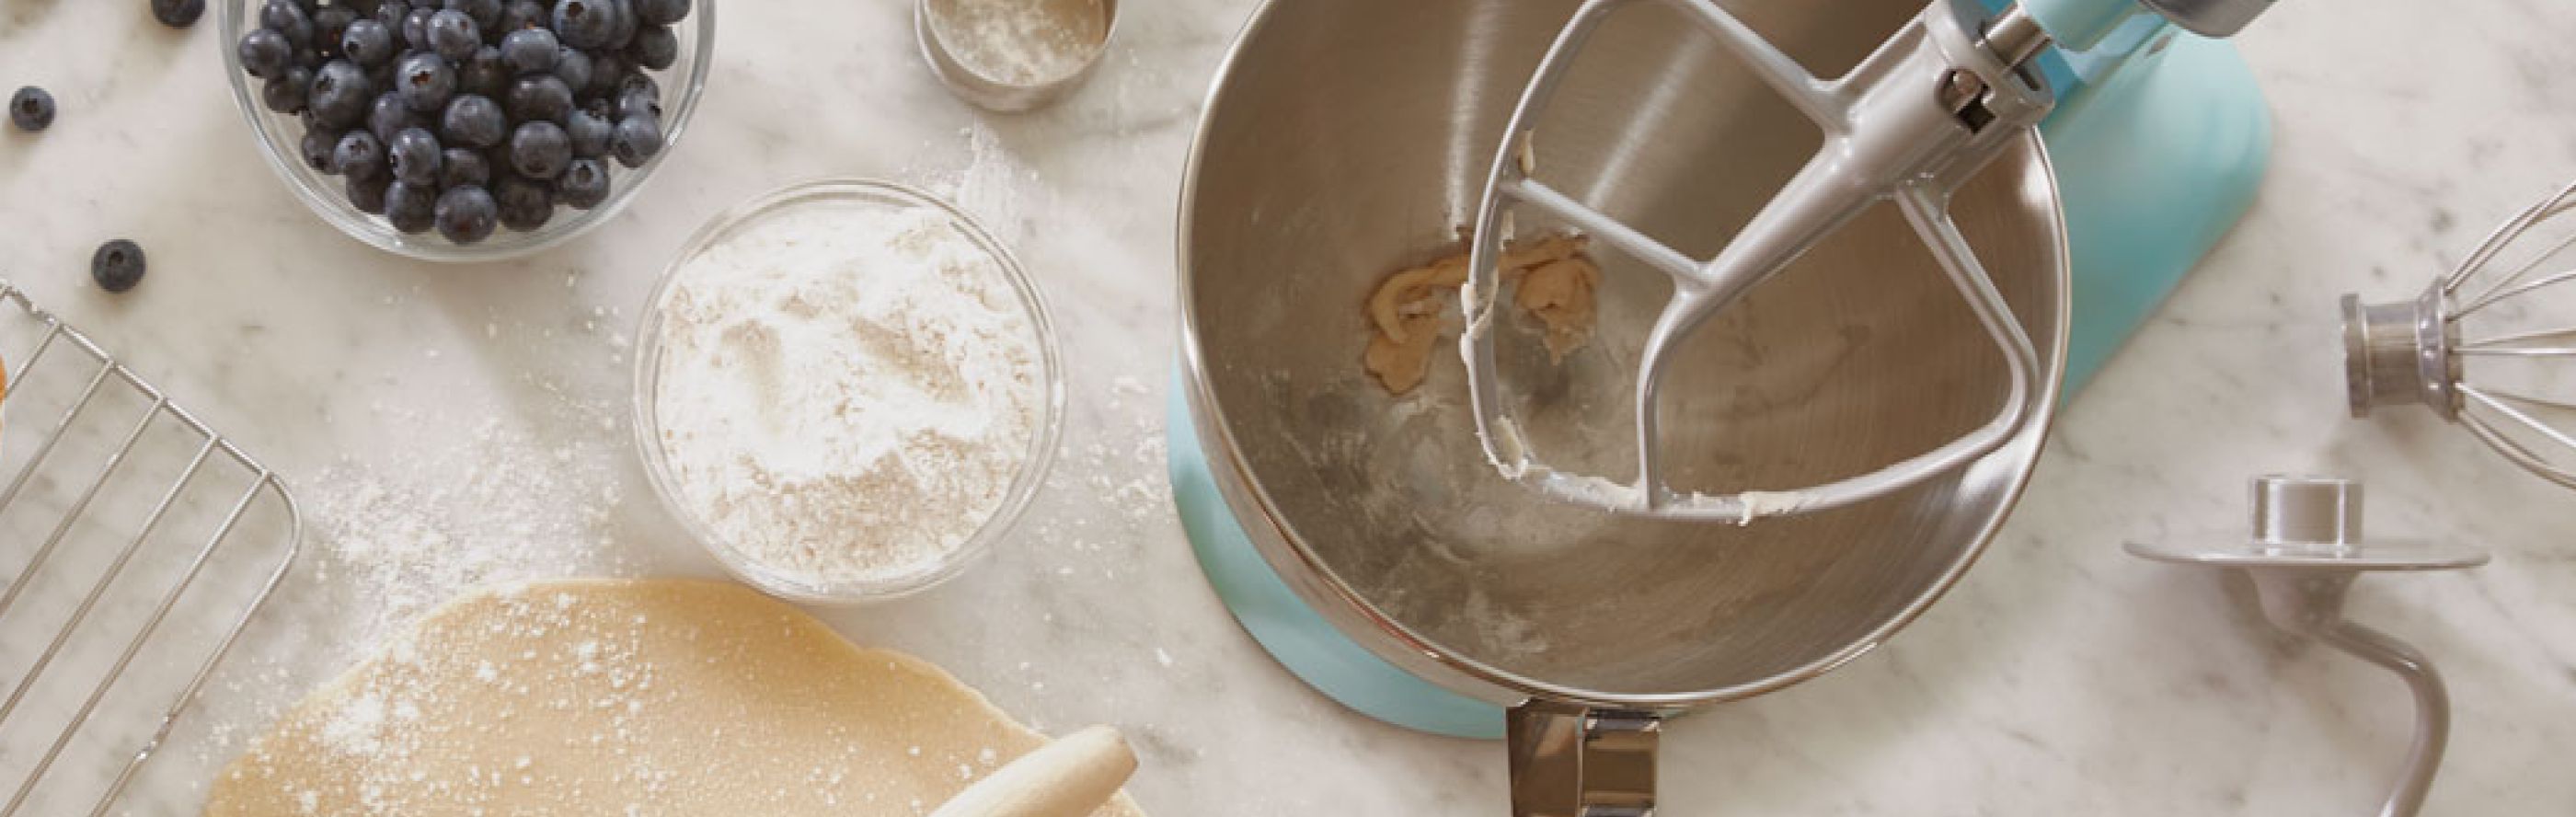 Blue KitchenAid® stand mixer next to pastry ingredients